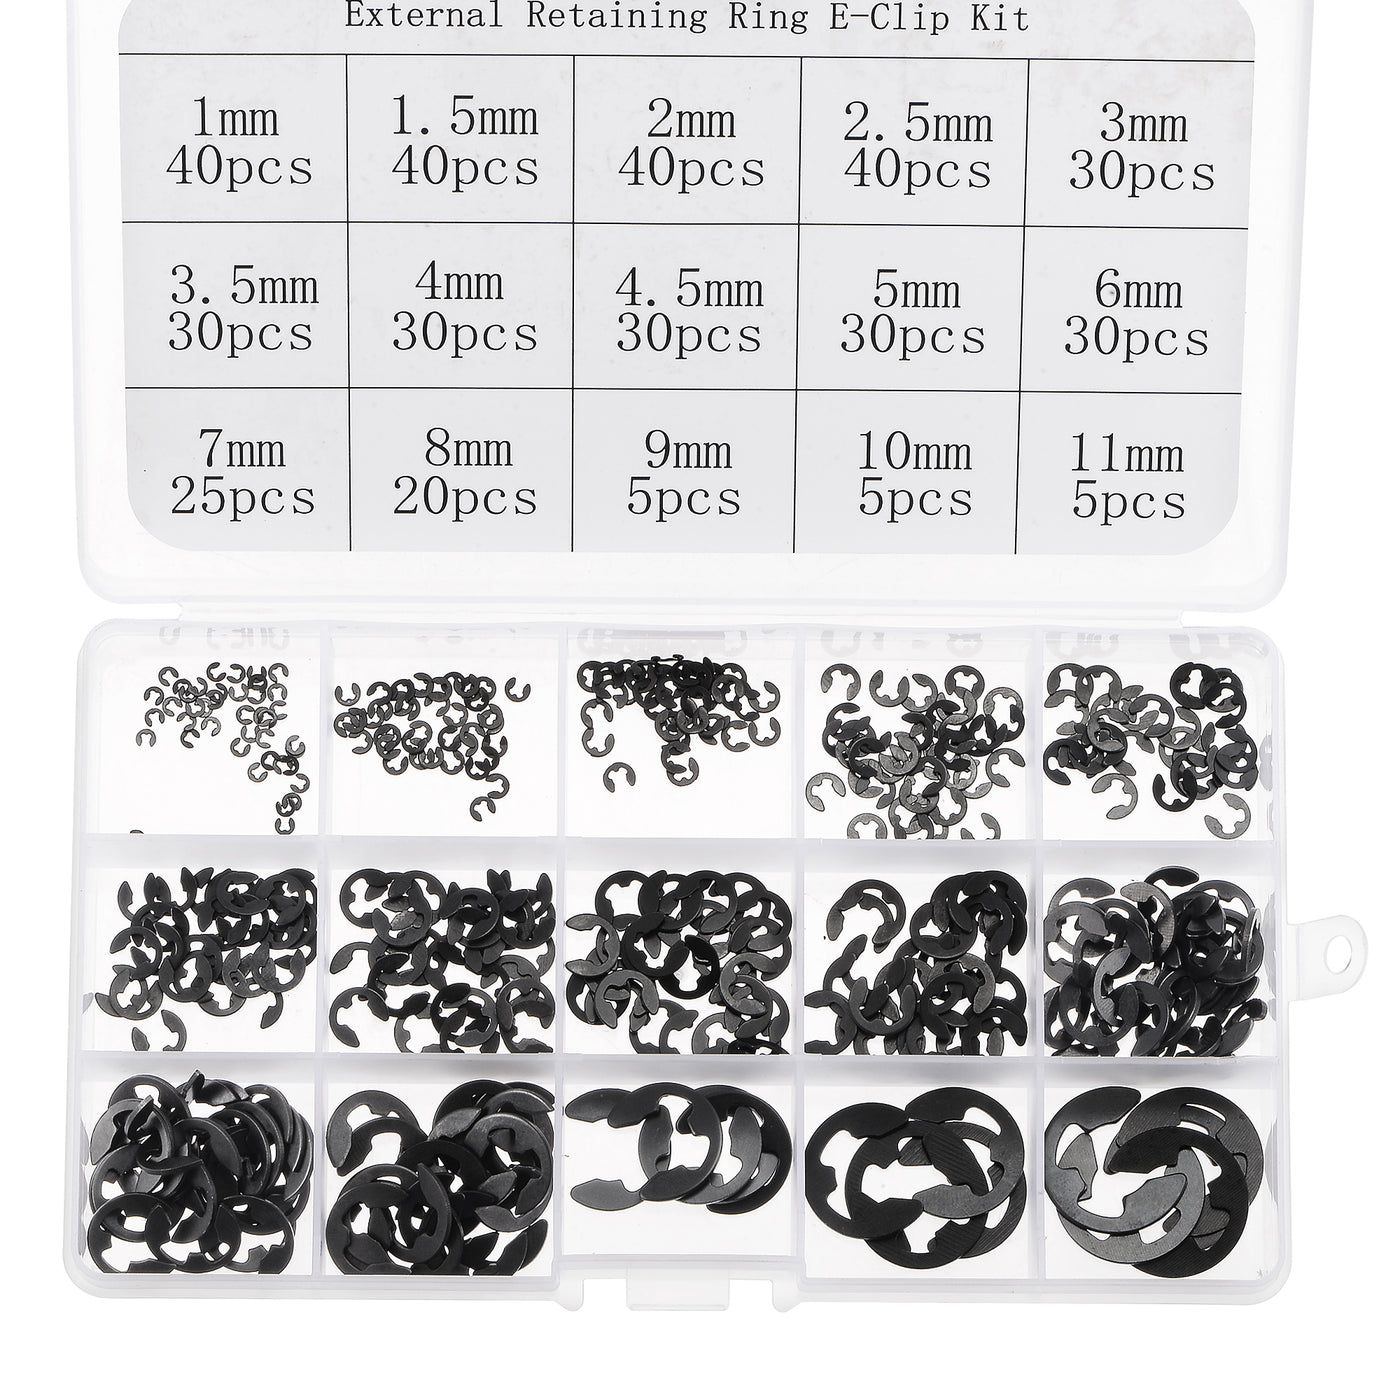 uxcell Uxcell E-Clip 400Pcs 1/1.5/2/2.5/3/3.5/4/ 4.5/5/6/7/8/9/10/11mm External Retaining Ring